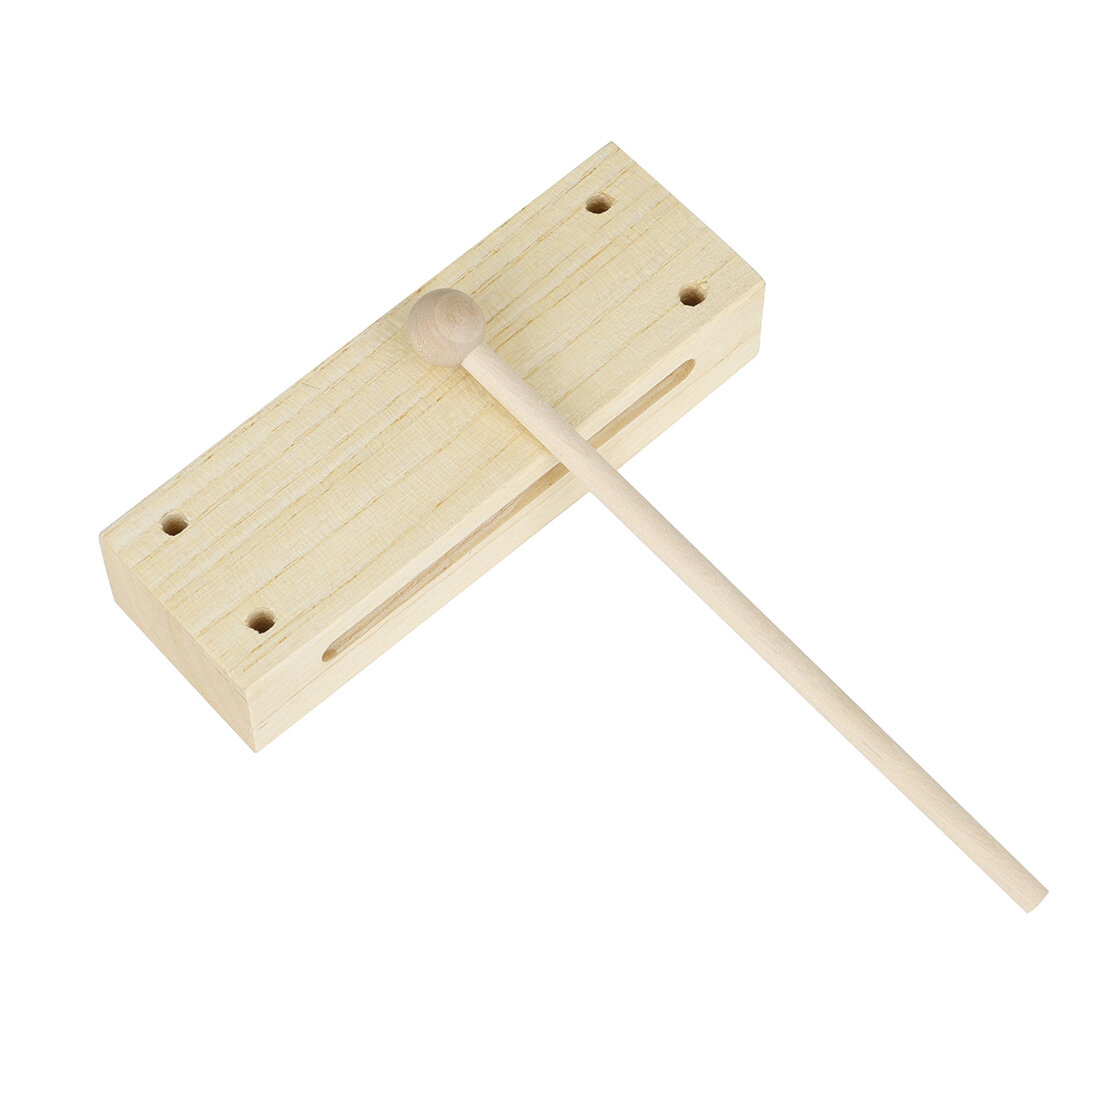 Flanger Toddler Musical Instruments Wooden High-quality Percussion Instrument with Children Mallet S